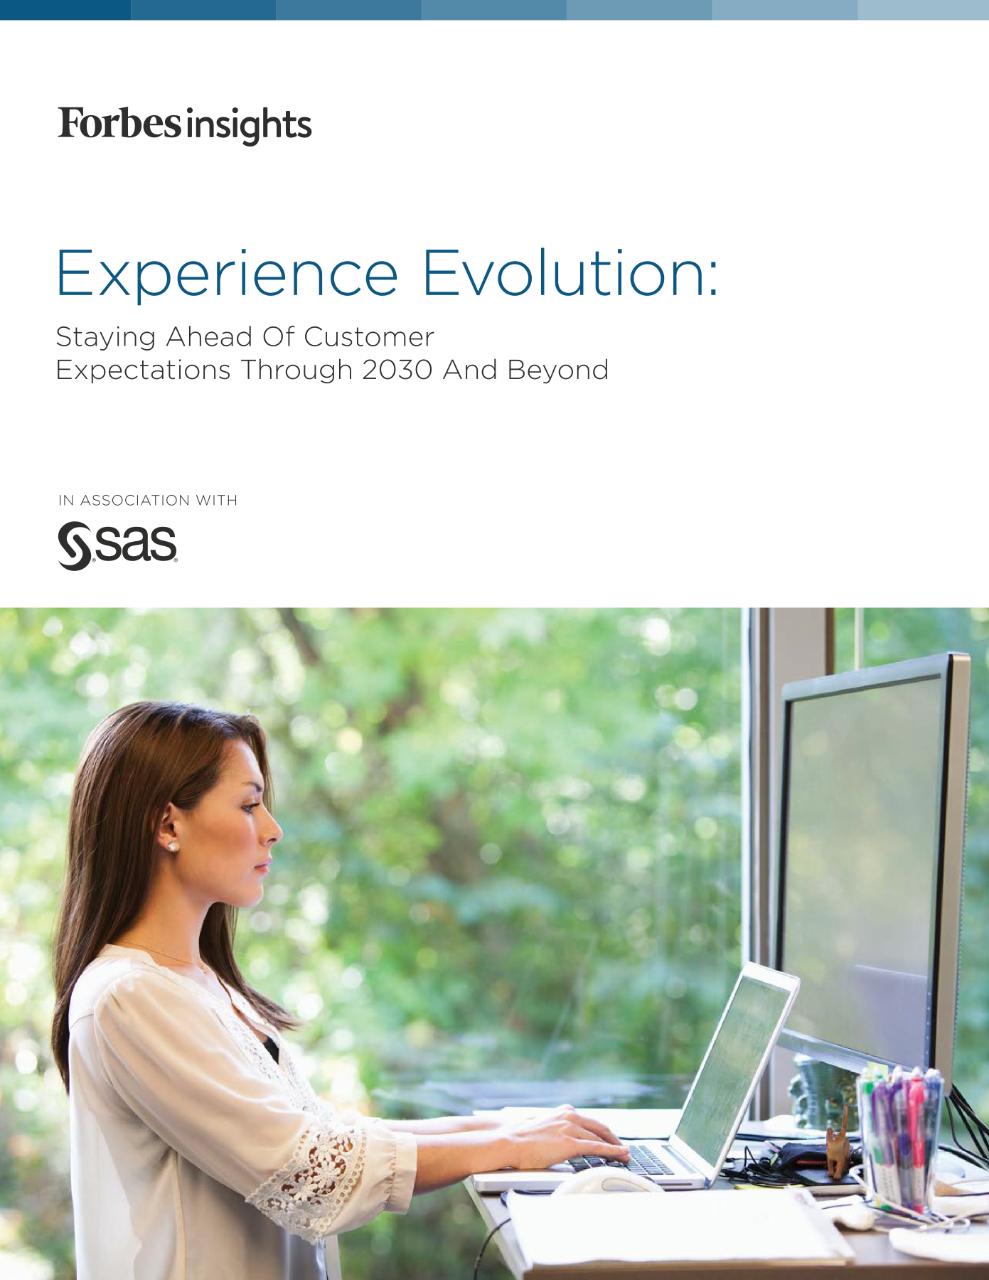 Experience Evolution: Staying Ahead of Customer Expectations Through 2030 and Beyond